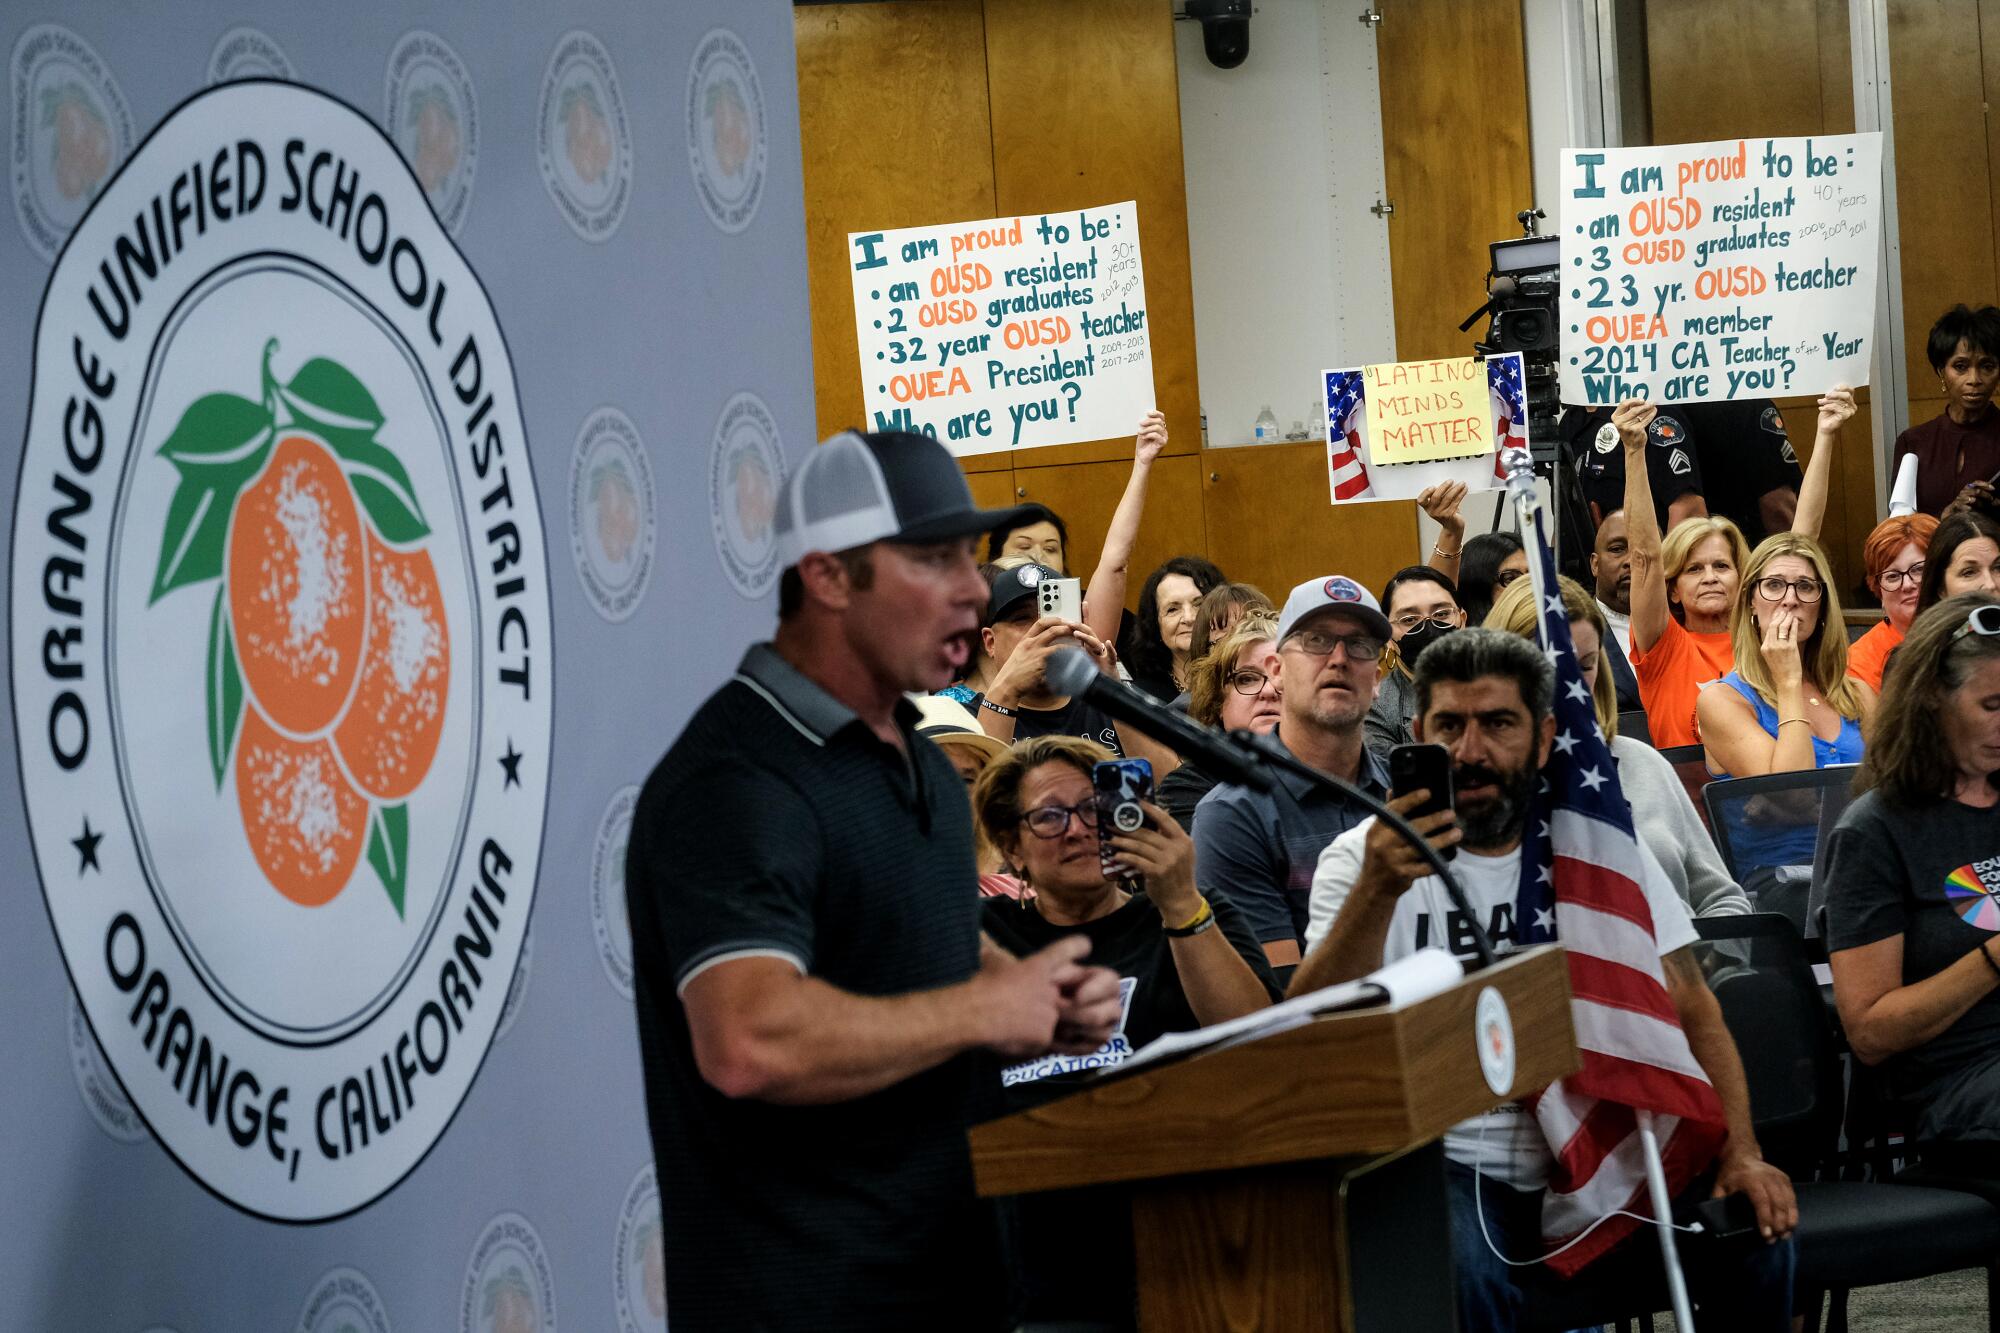 People hold up signs while a man addresses the Orange Unified School District board on Sept. 7.